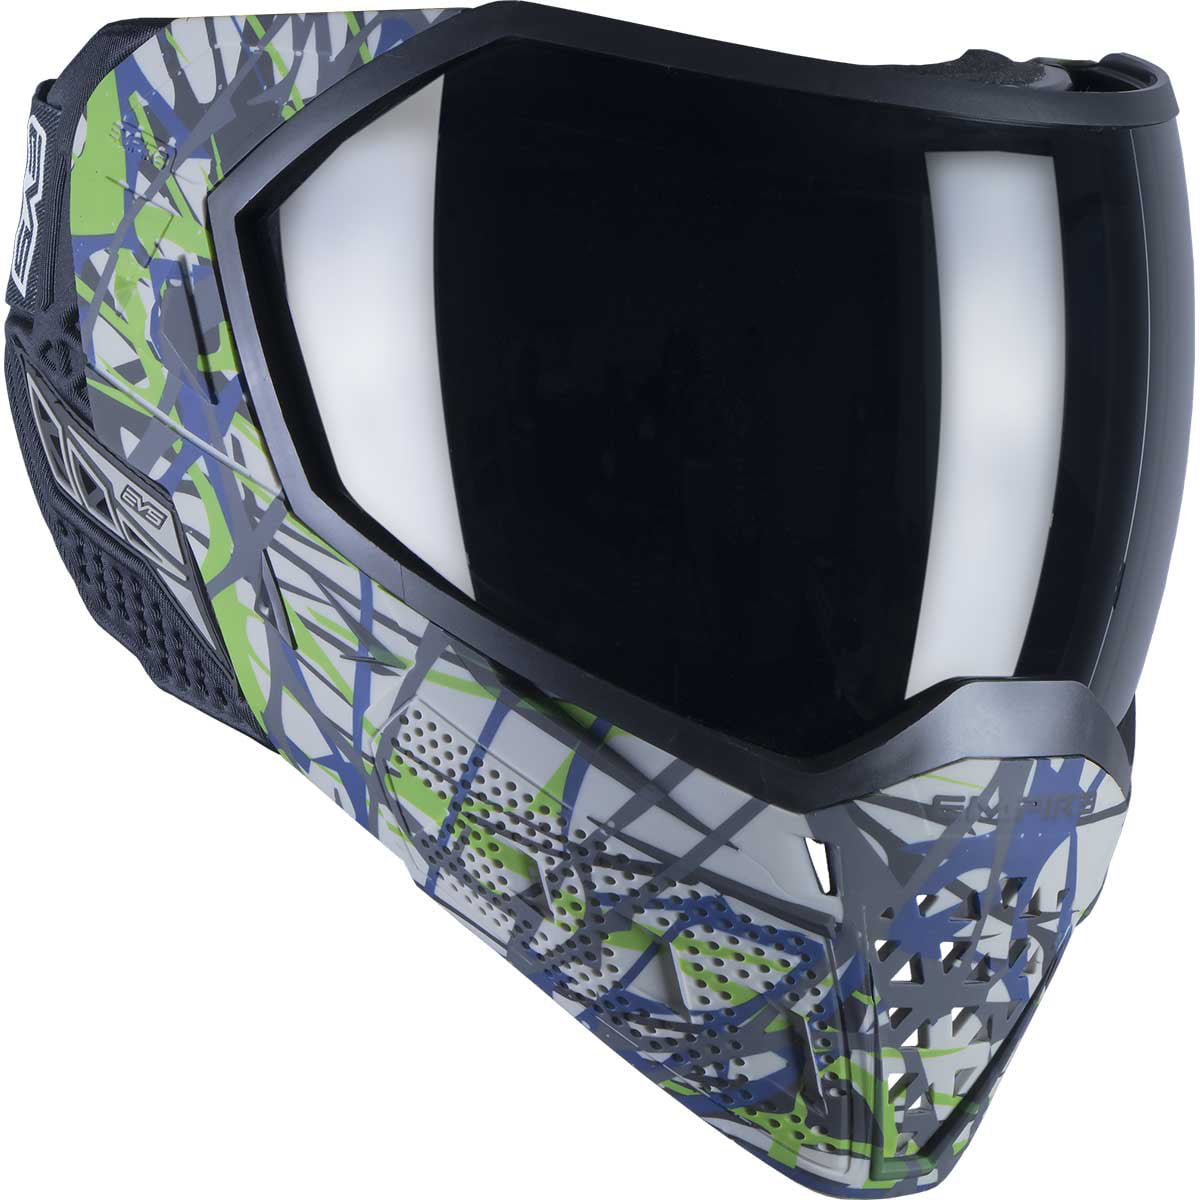 Details about   Empire EVS Thermal Paintball Goggles Mask Black/Aqua Blue w Ninja & Clear Lens 